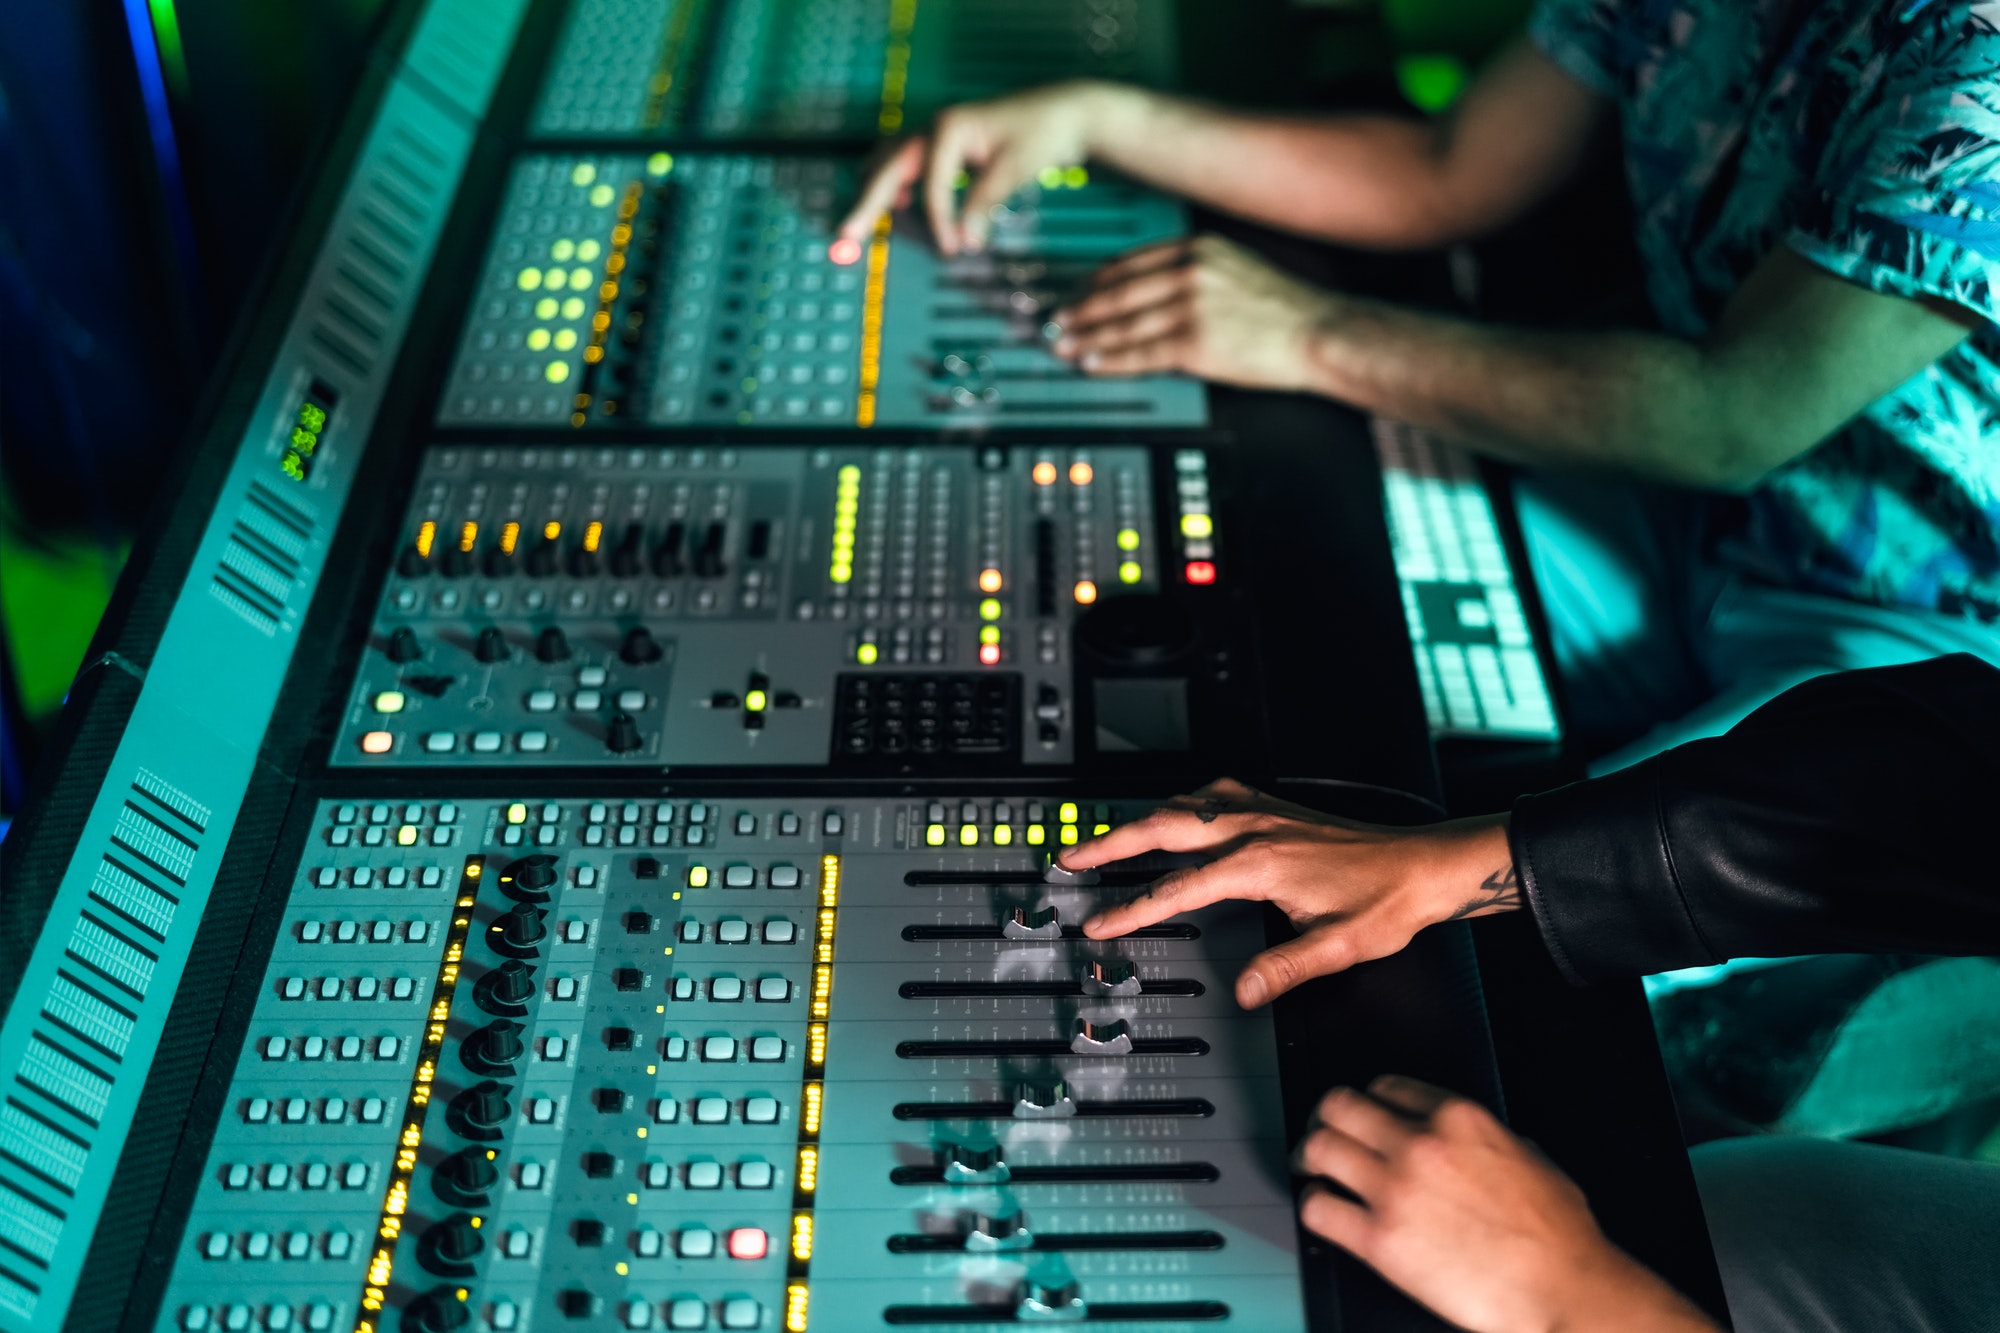 Close up audio engineer hands working with panel mixer control in music recording studio